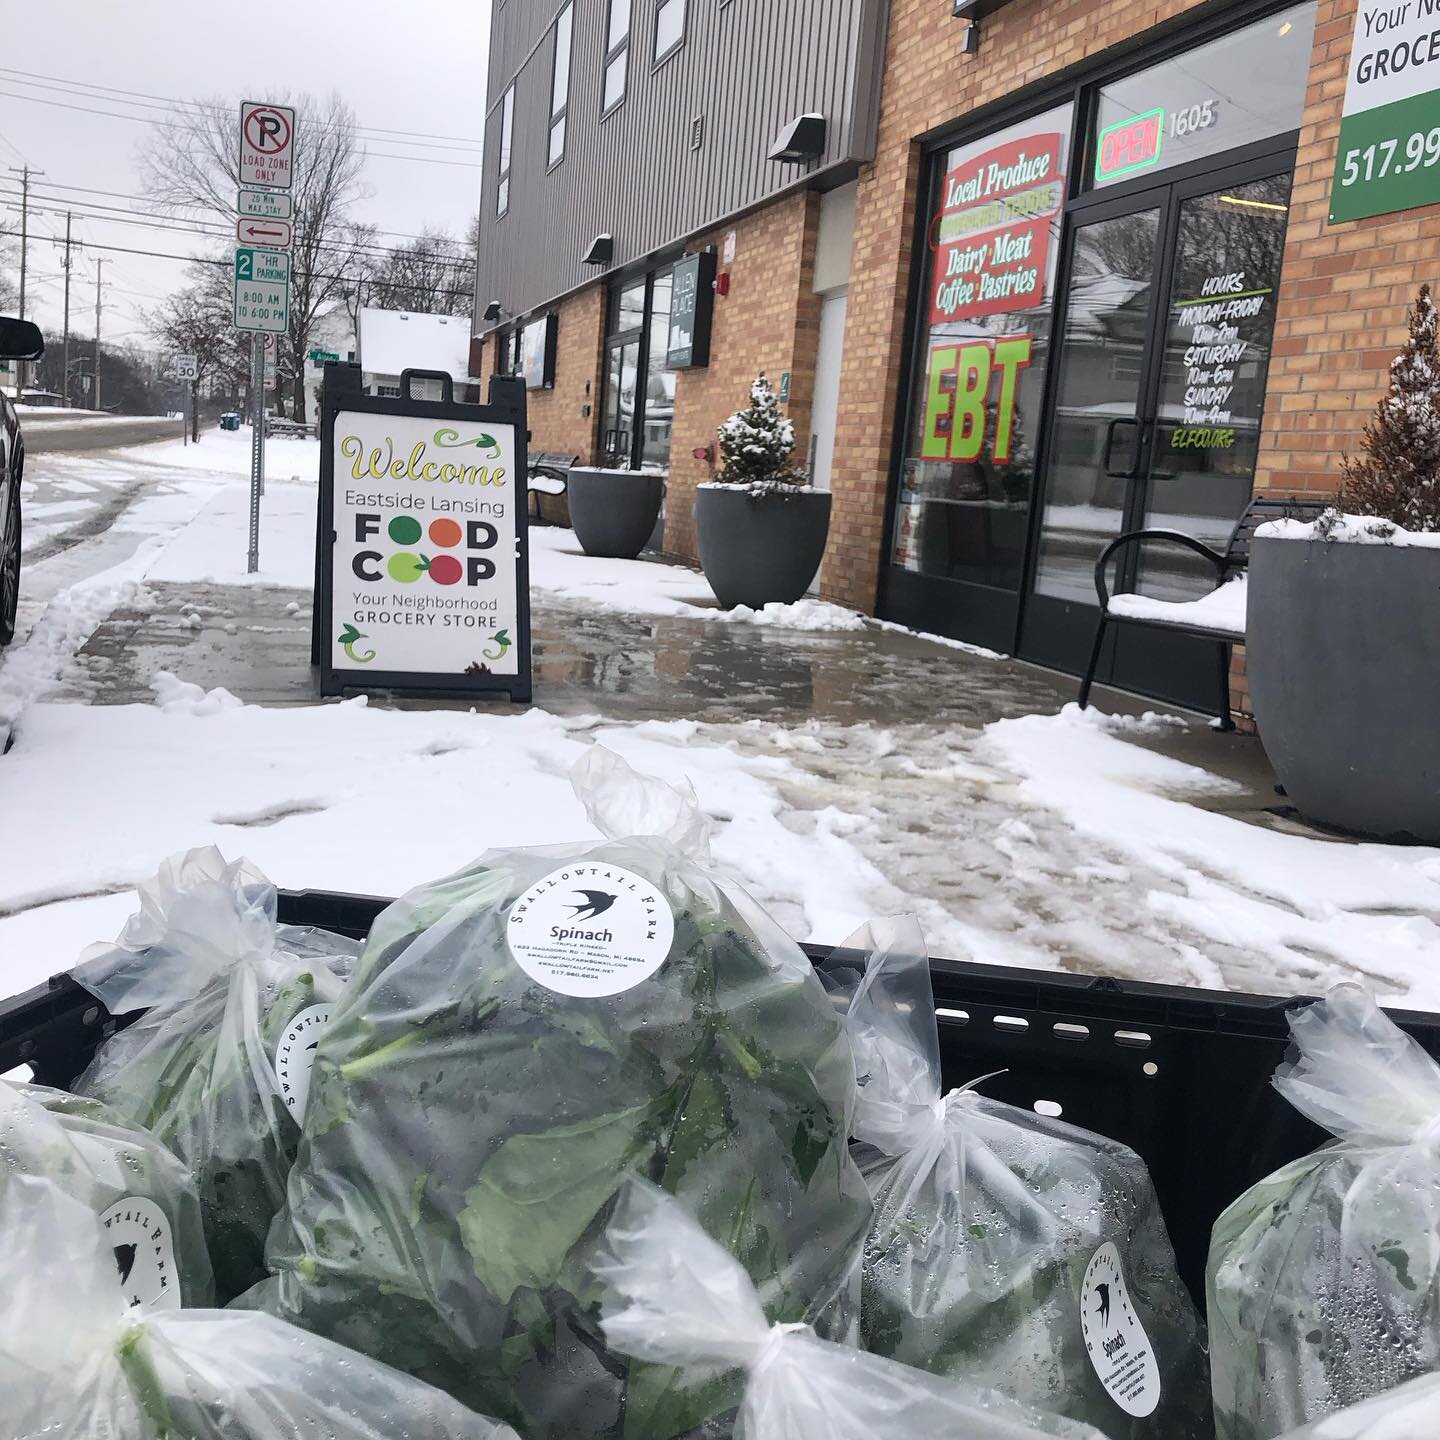 A little snow didn&rsquo;t stop us from dropping off greens at @elfco_lansing